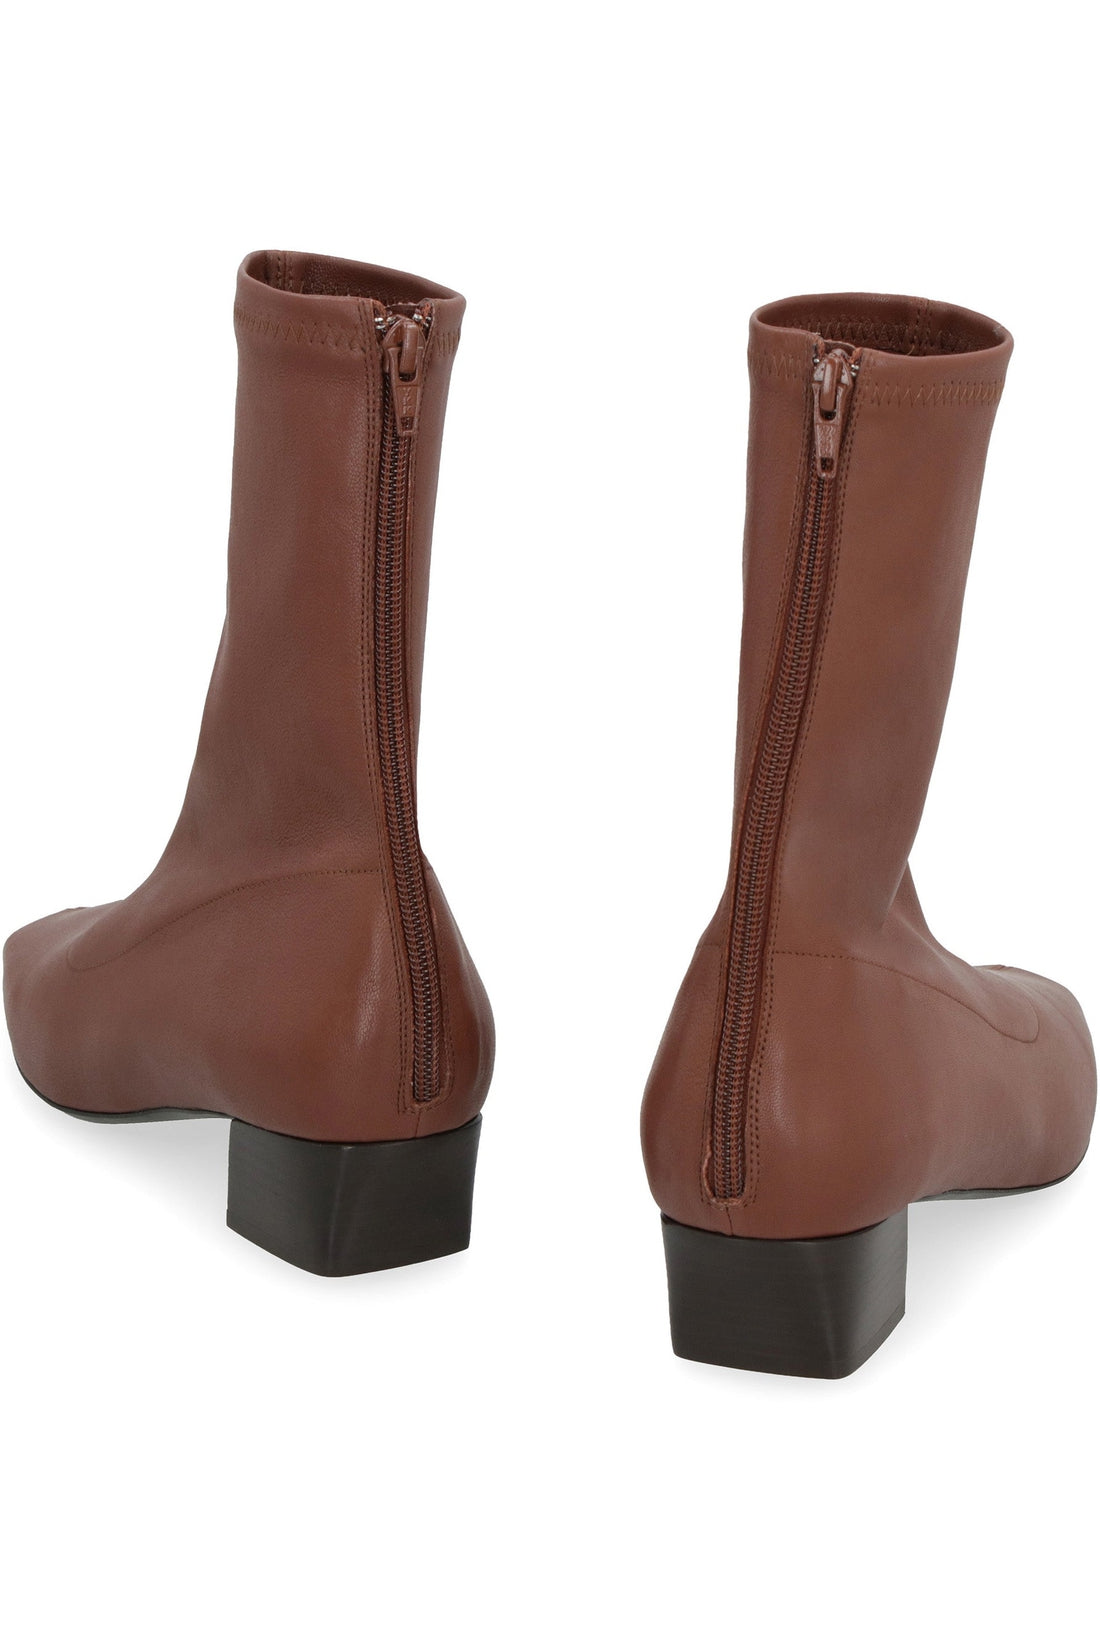 BY FAR-OUTLET-SALE-Colette leather ankle boots-ARCHIVIST